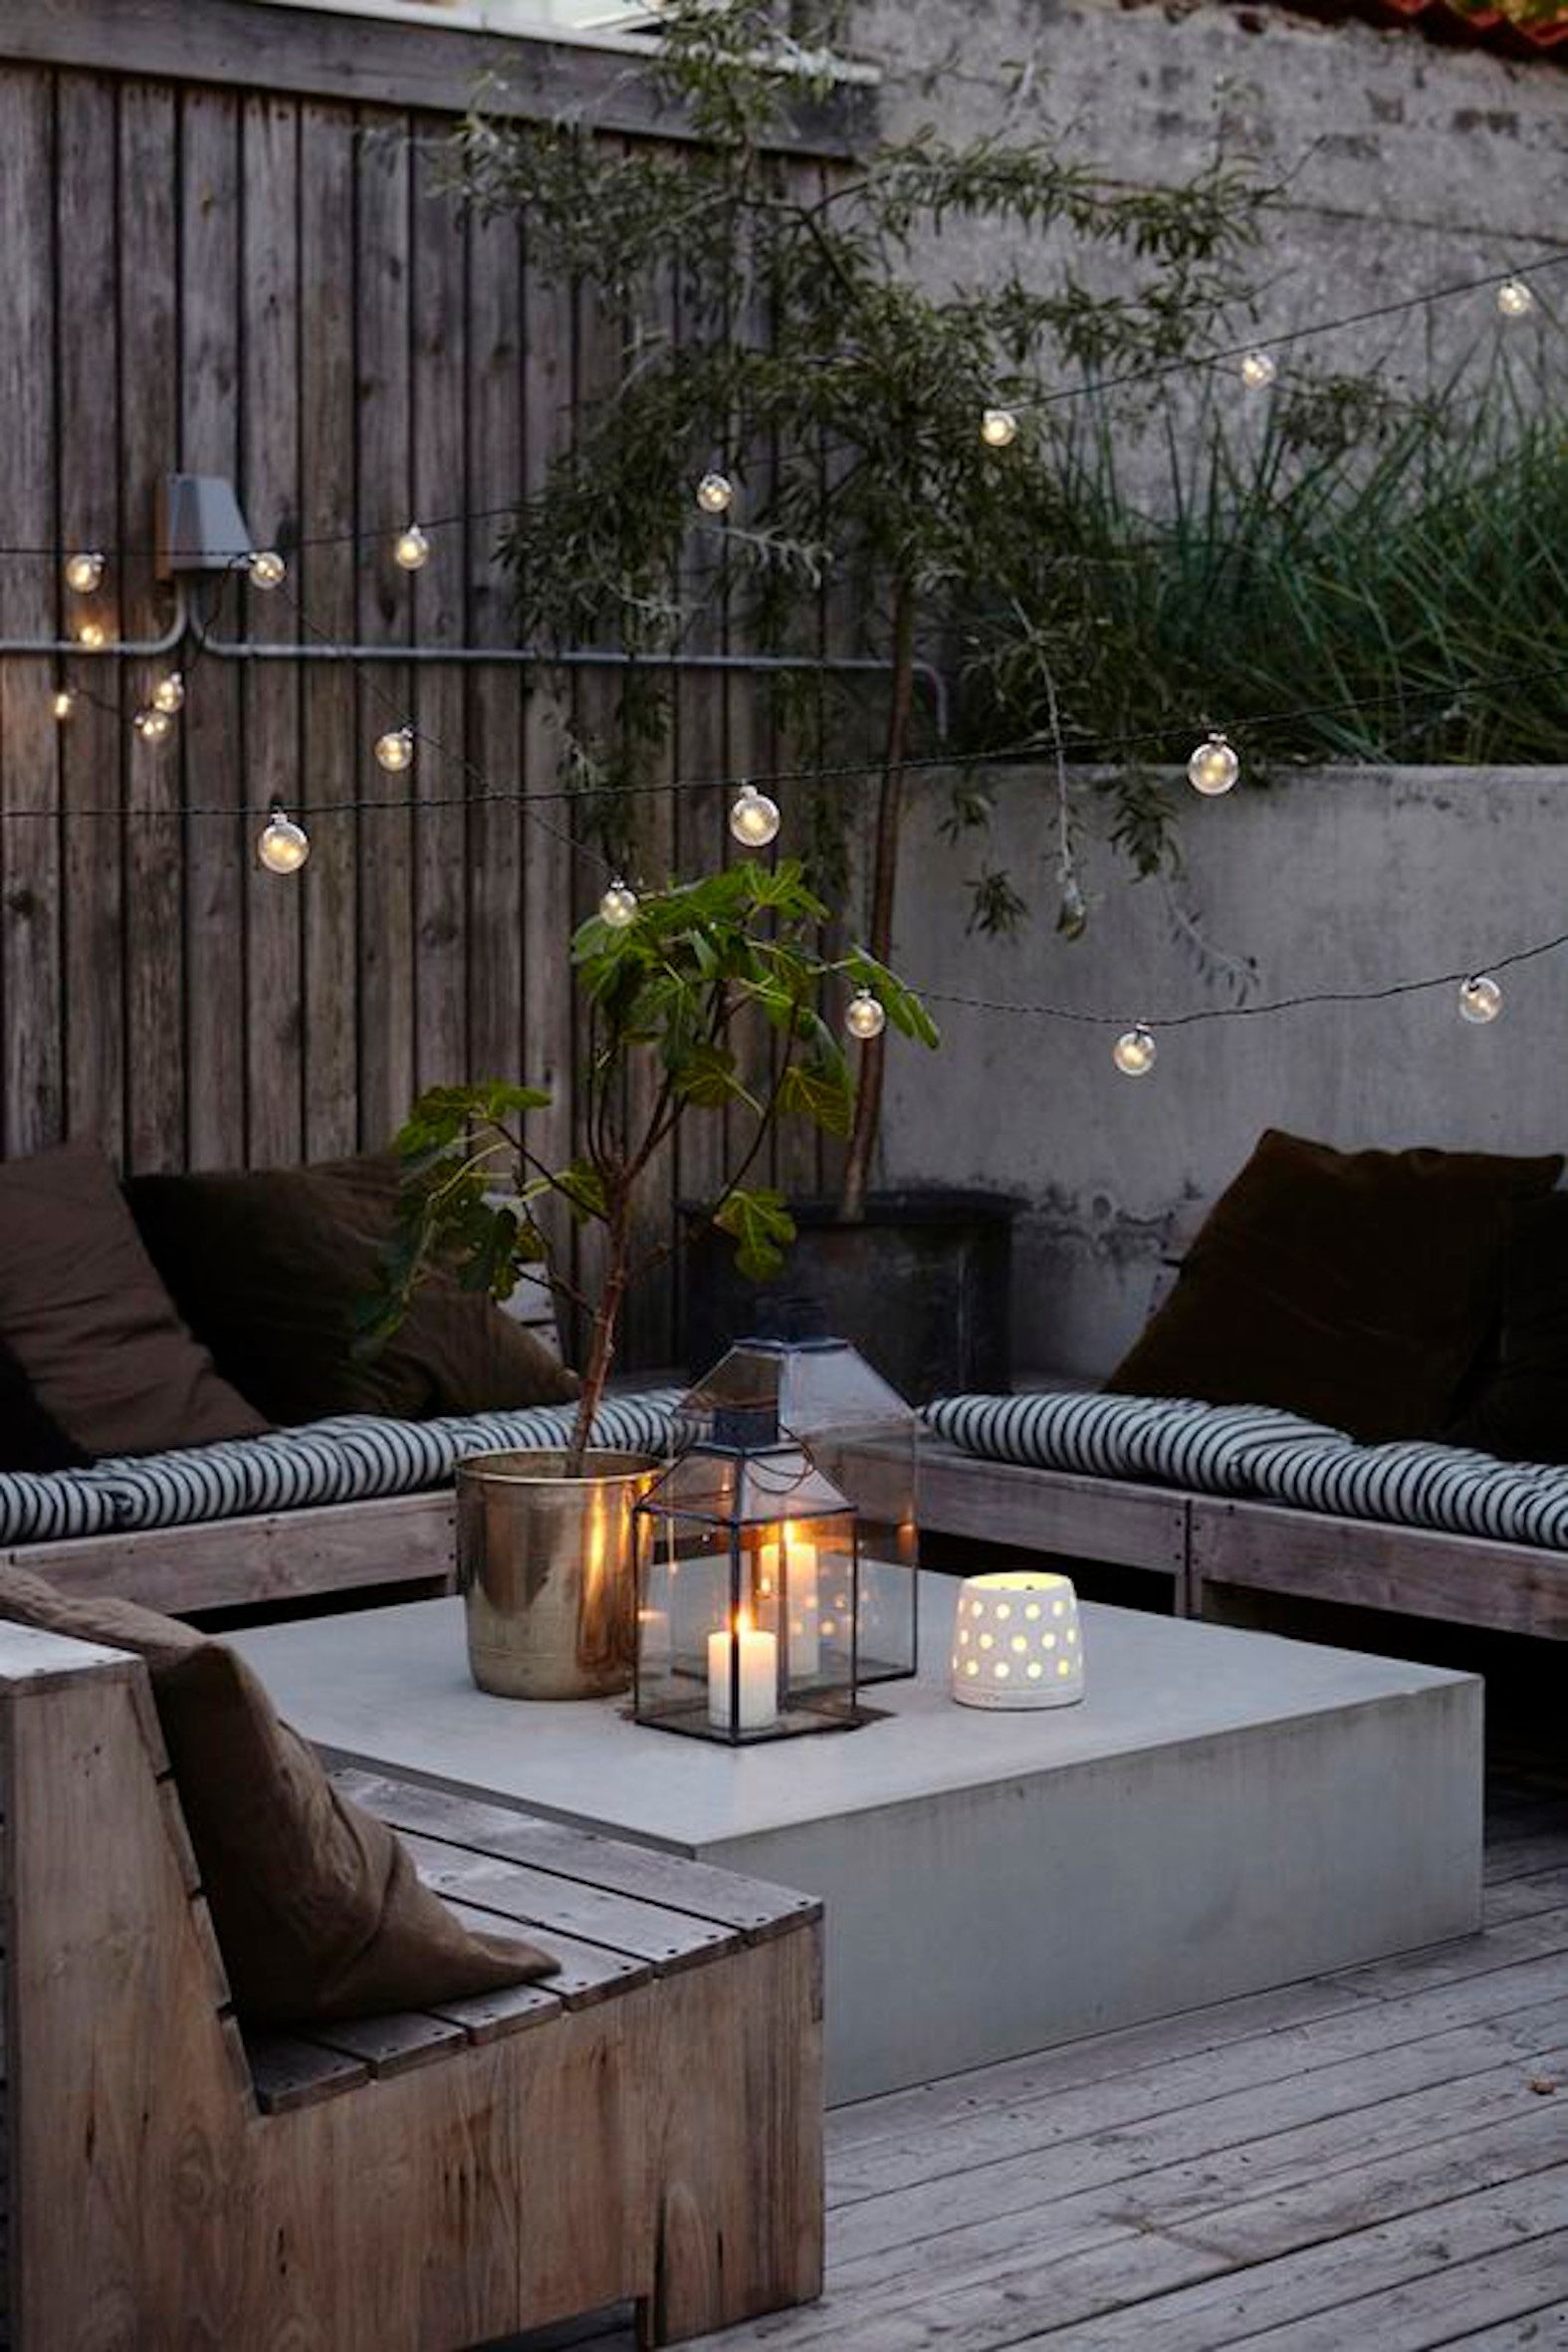 <p>                     Choose a selection of backyard party lighting to add that all-important glow at dusk – the evening garden needs lots of lights to get the right effect.                   </p>                                      <p>                     For the best results add layers of lighting at different heights. Start with tea lights in glass jars and hurricane lights at table height, then add festoon lights looped through the branches of shrubs, around pergolas or along fences.                   </p>